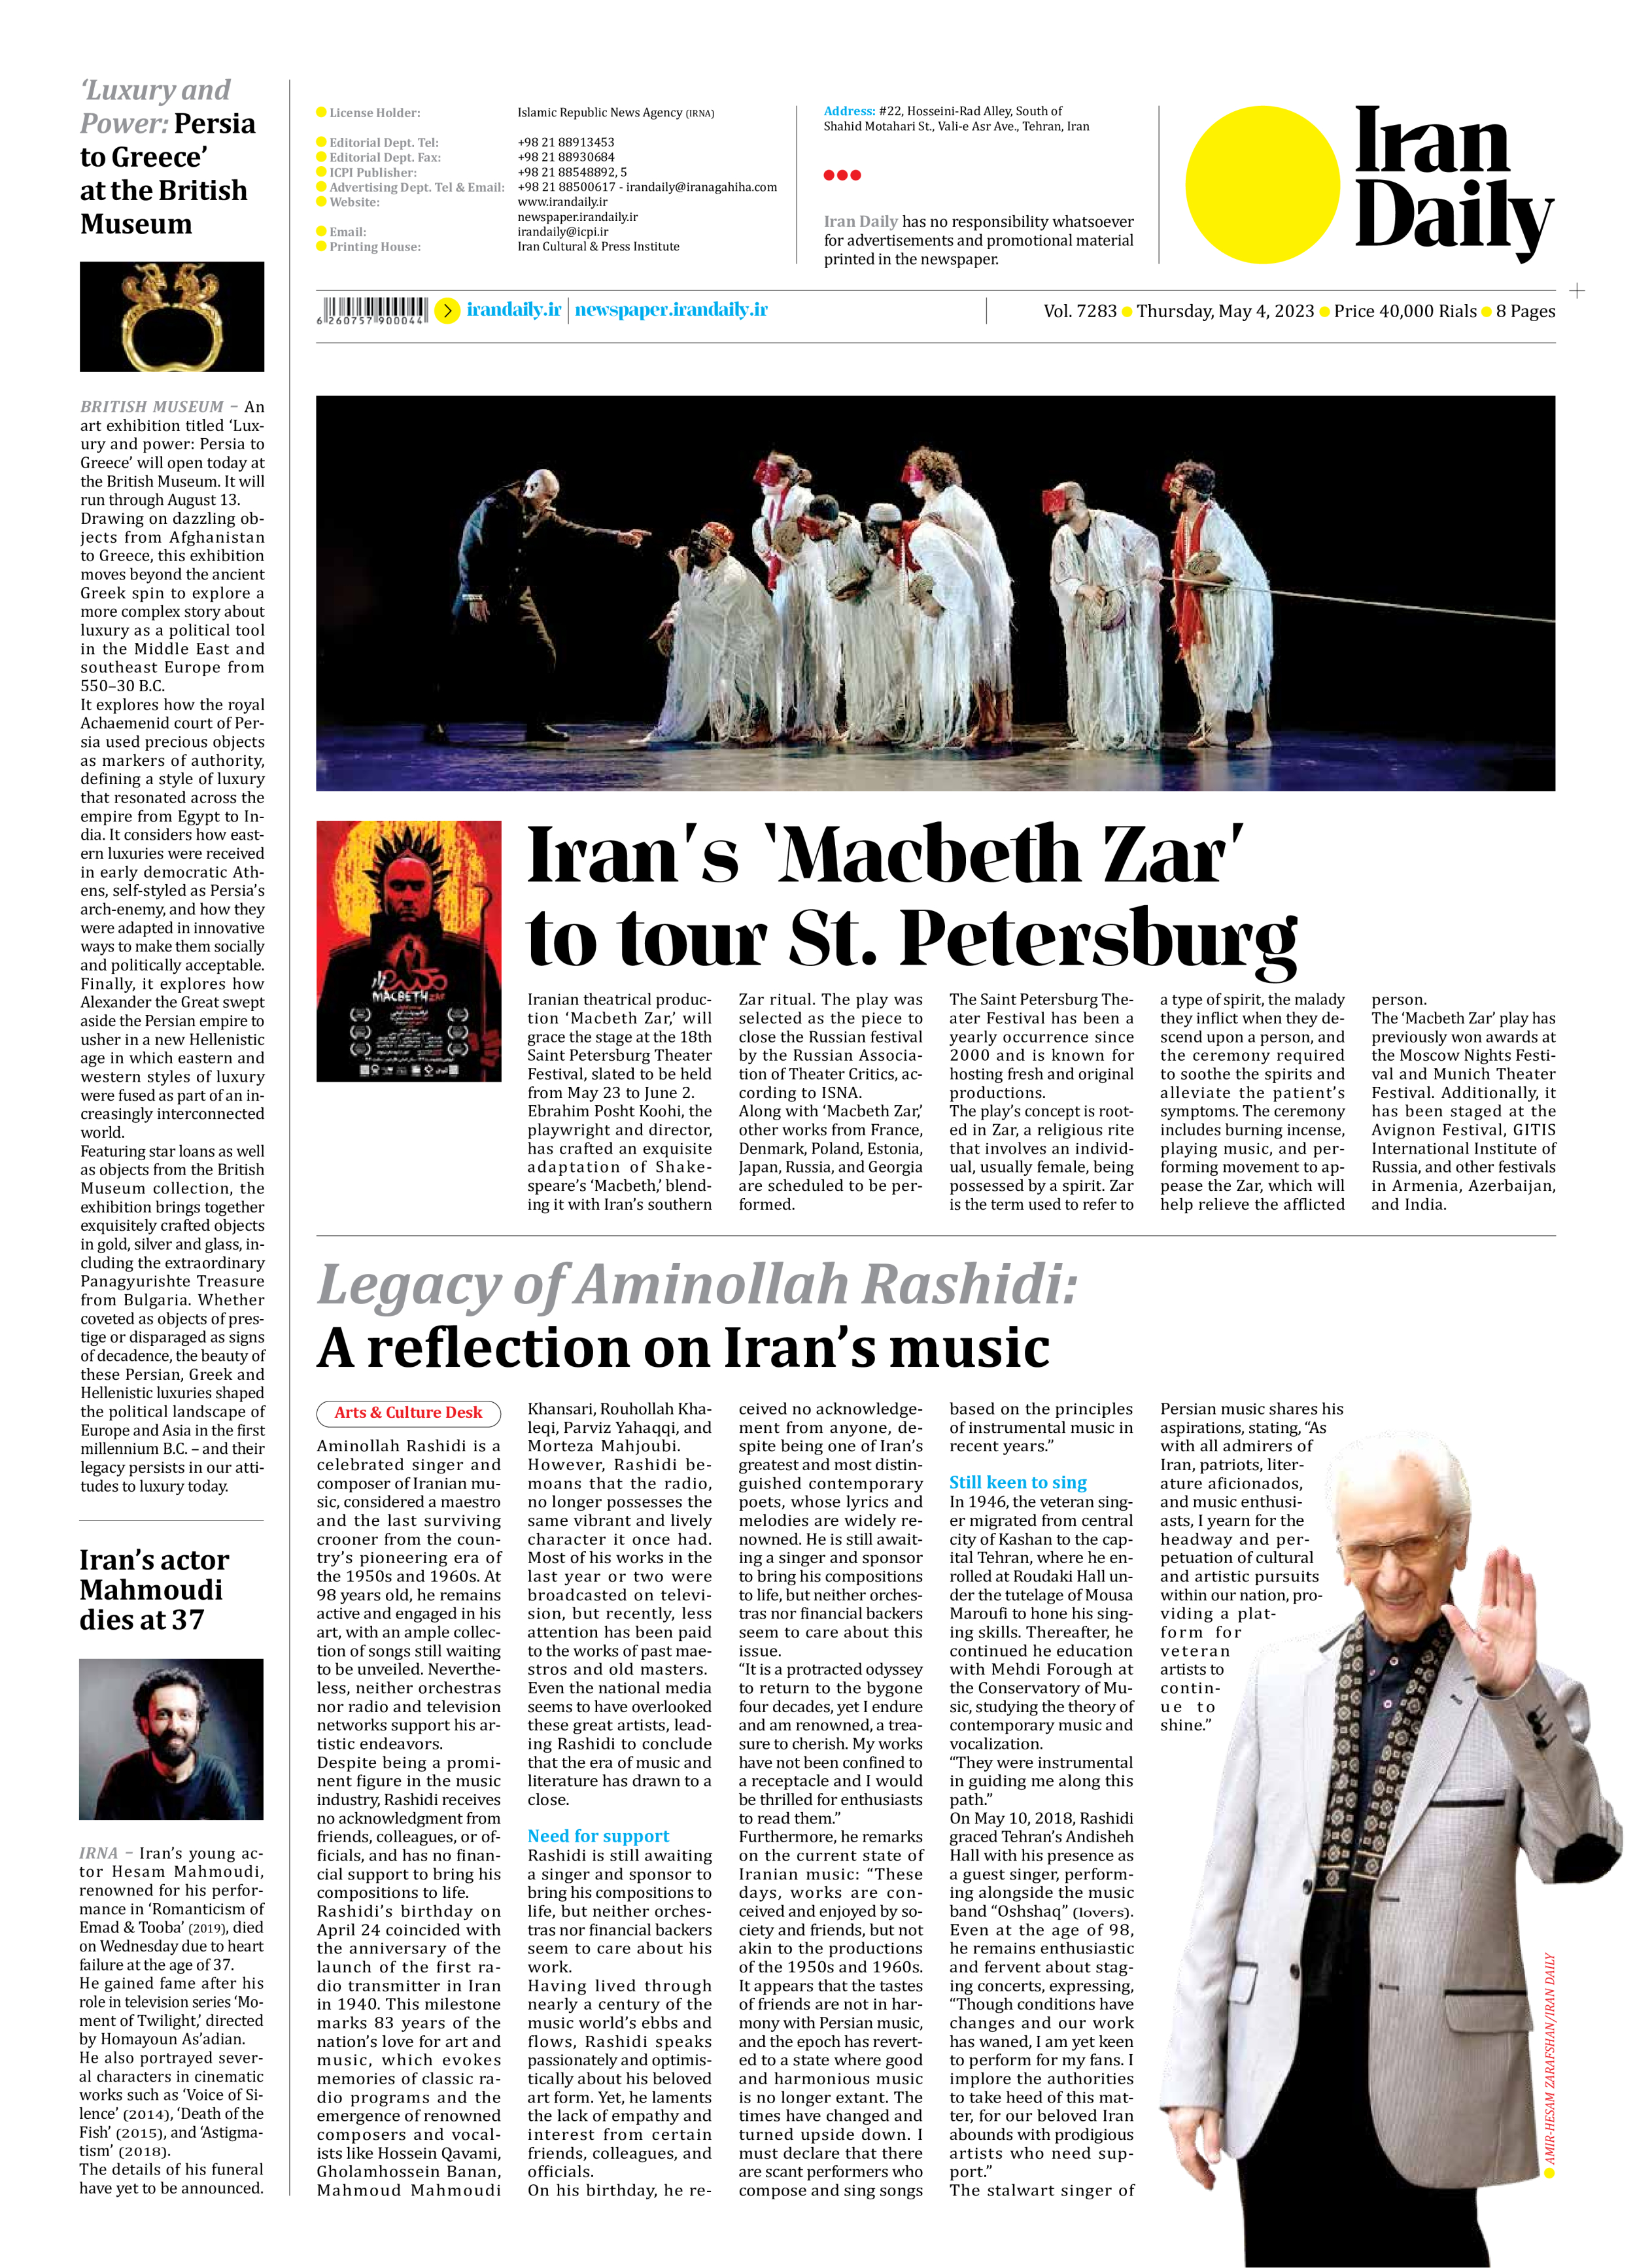 Iran Daily - Number Seven Thousand Two Hundred and Eighty Three - 04 May 2023 - Page 8